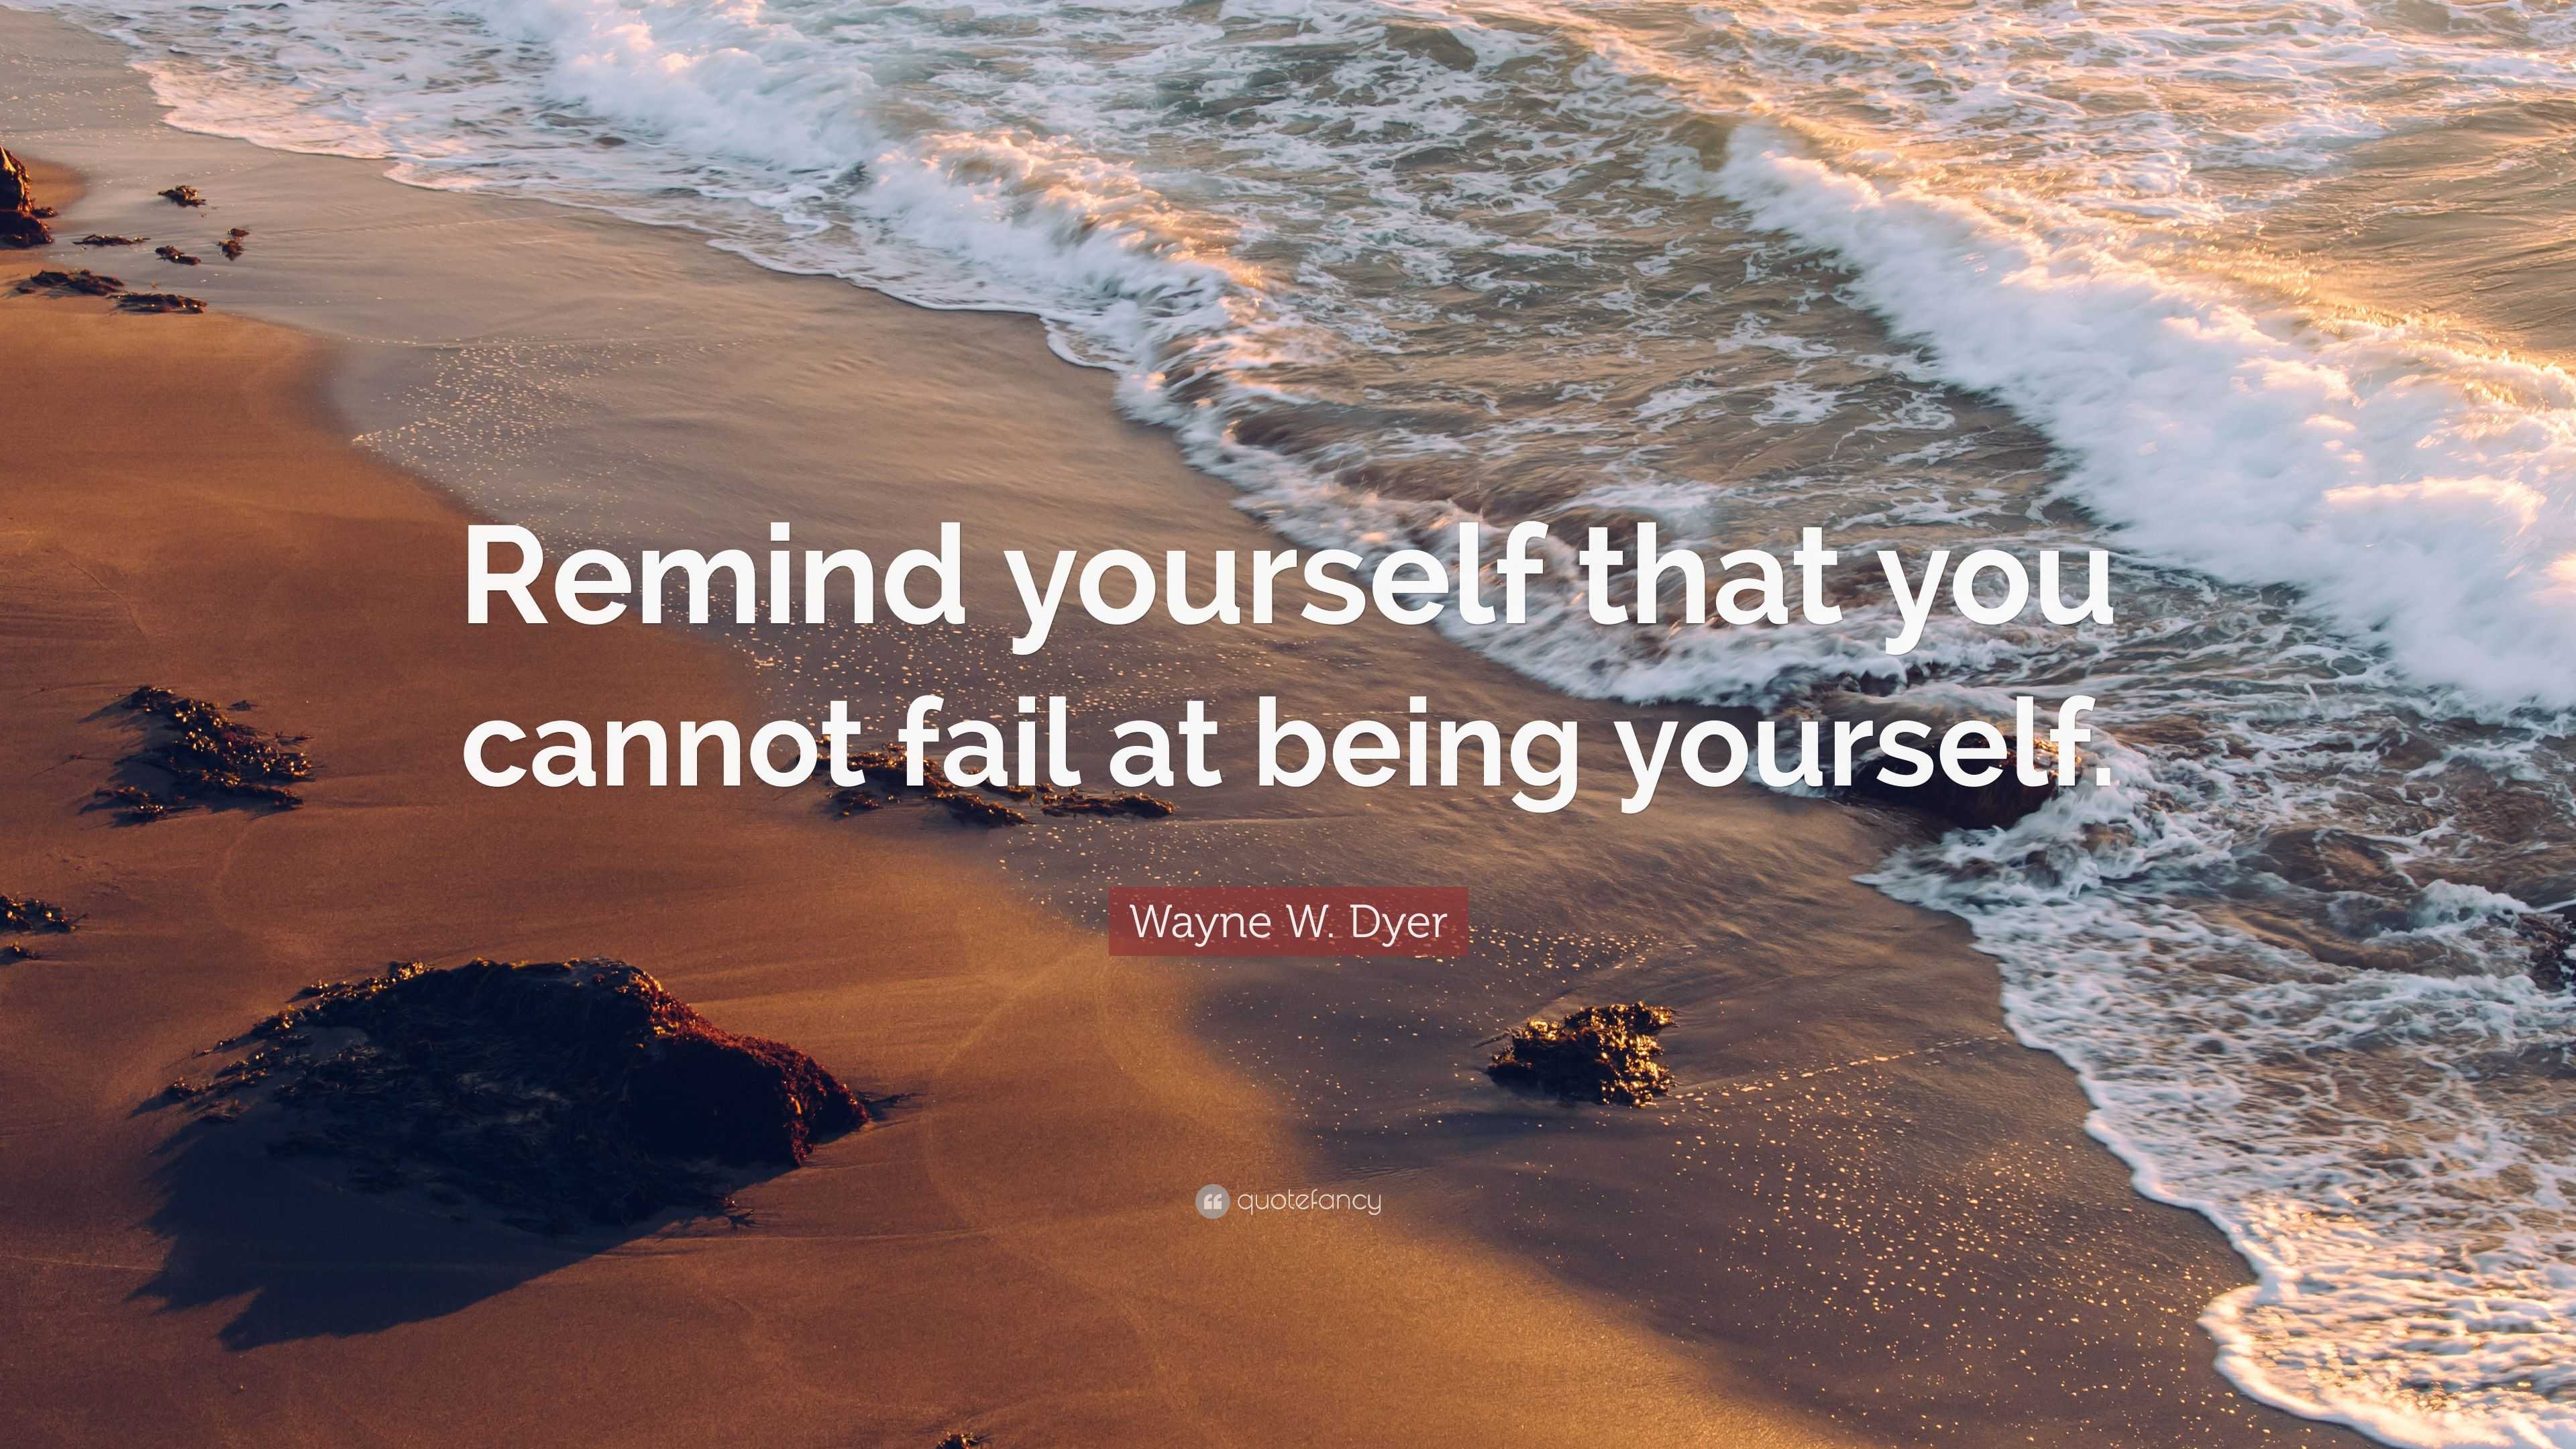 Wayne W. Dyer Quote: “Remind yourself that you cannot fail at being